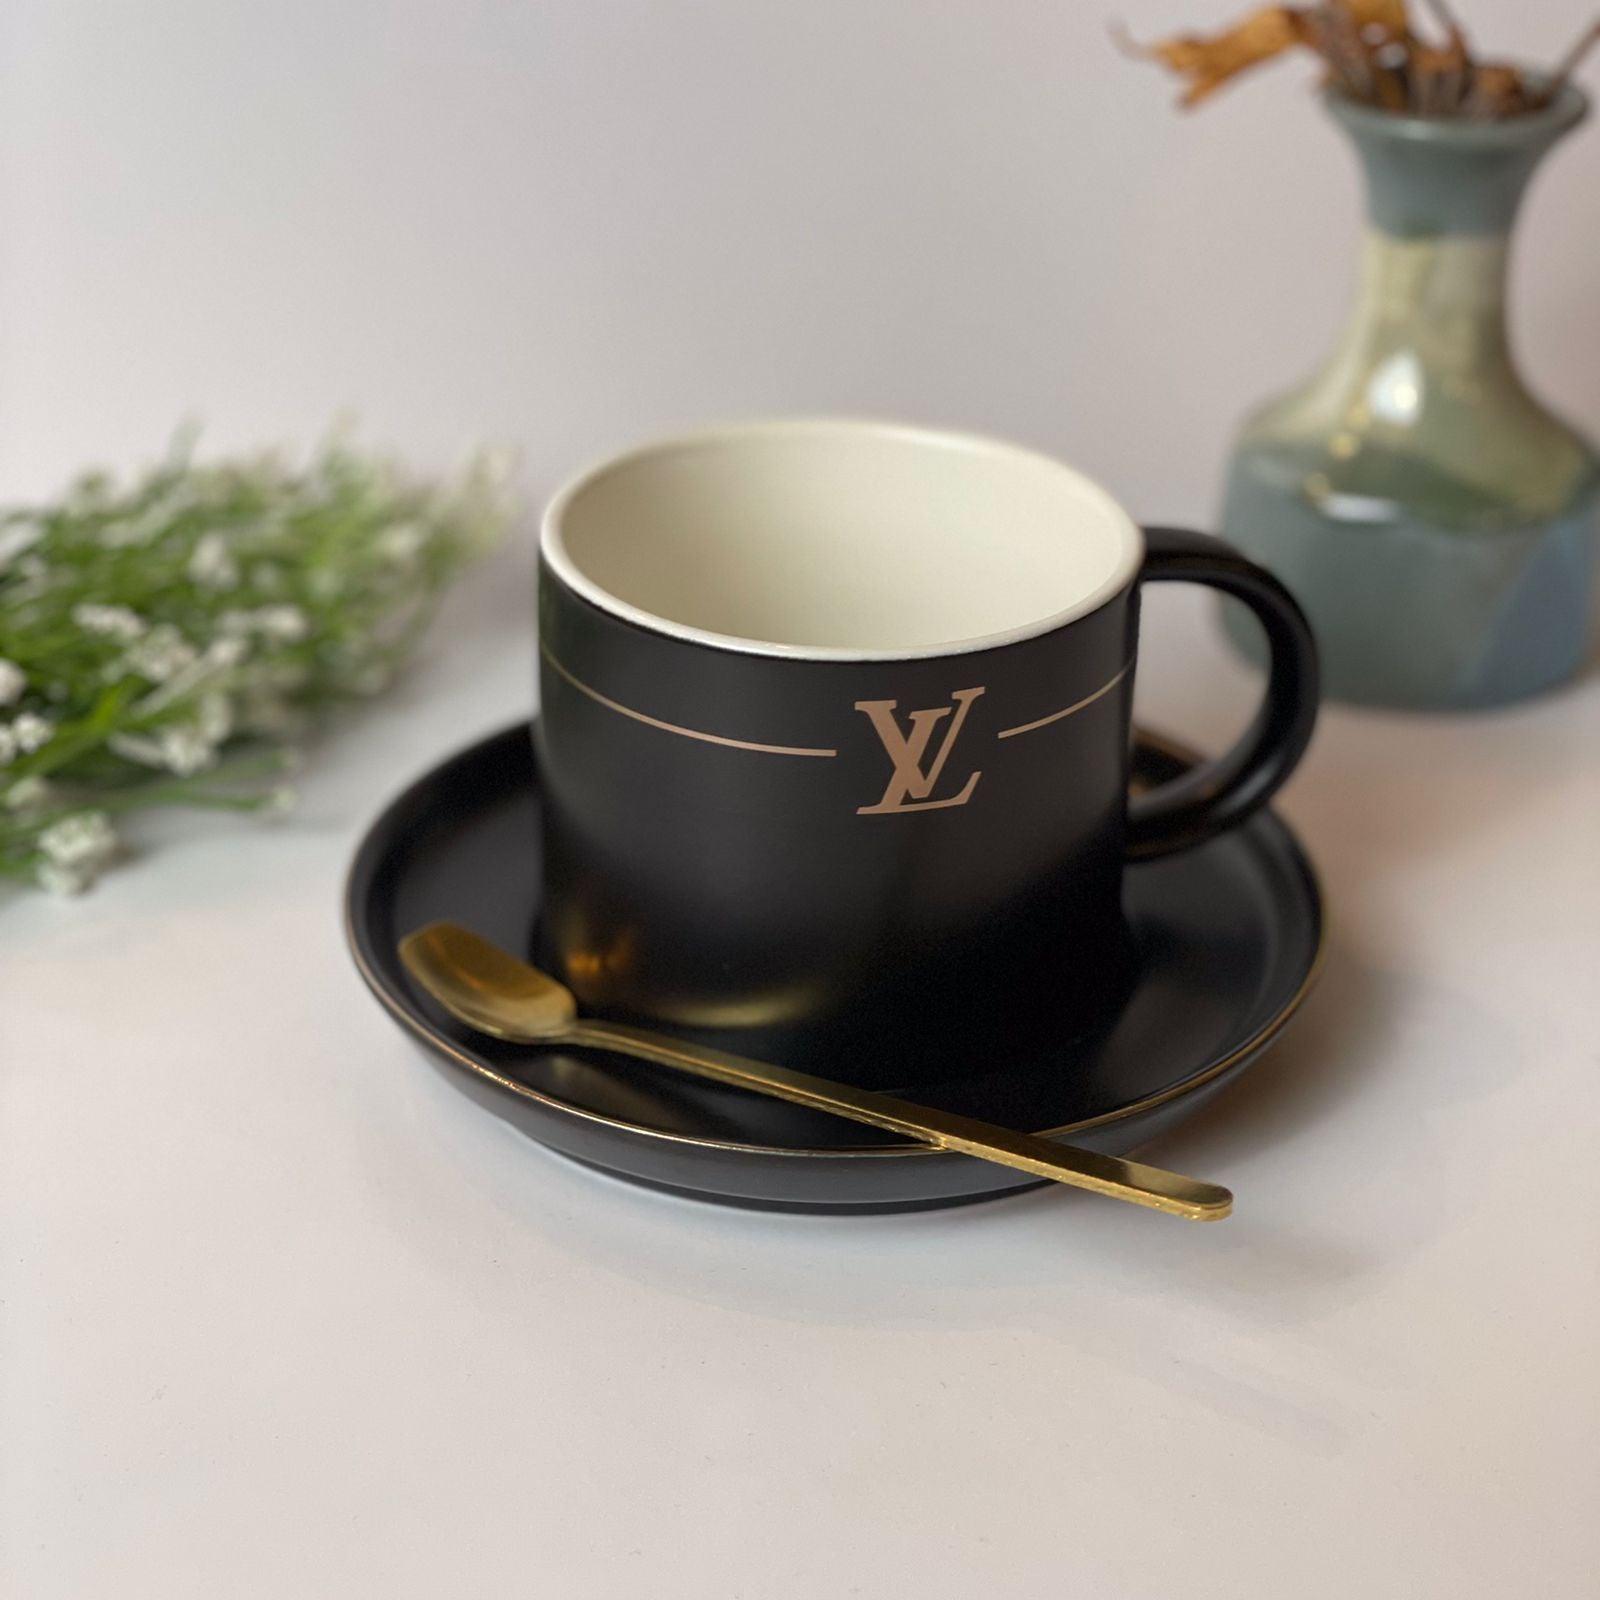 Beautiful Louis Vuitton Tea/Coffee cups with saucer and Golden